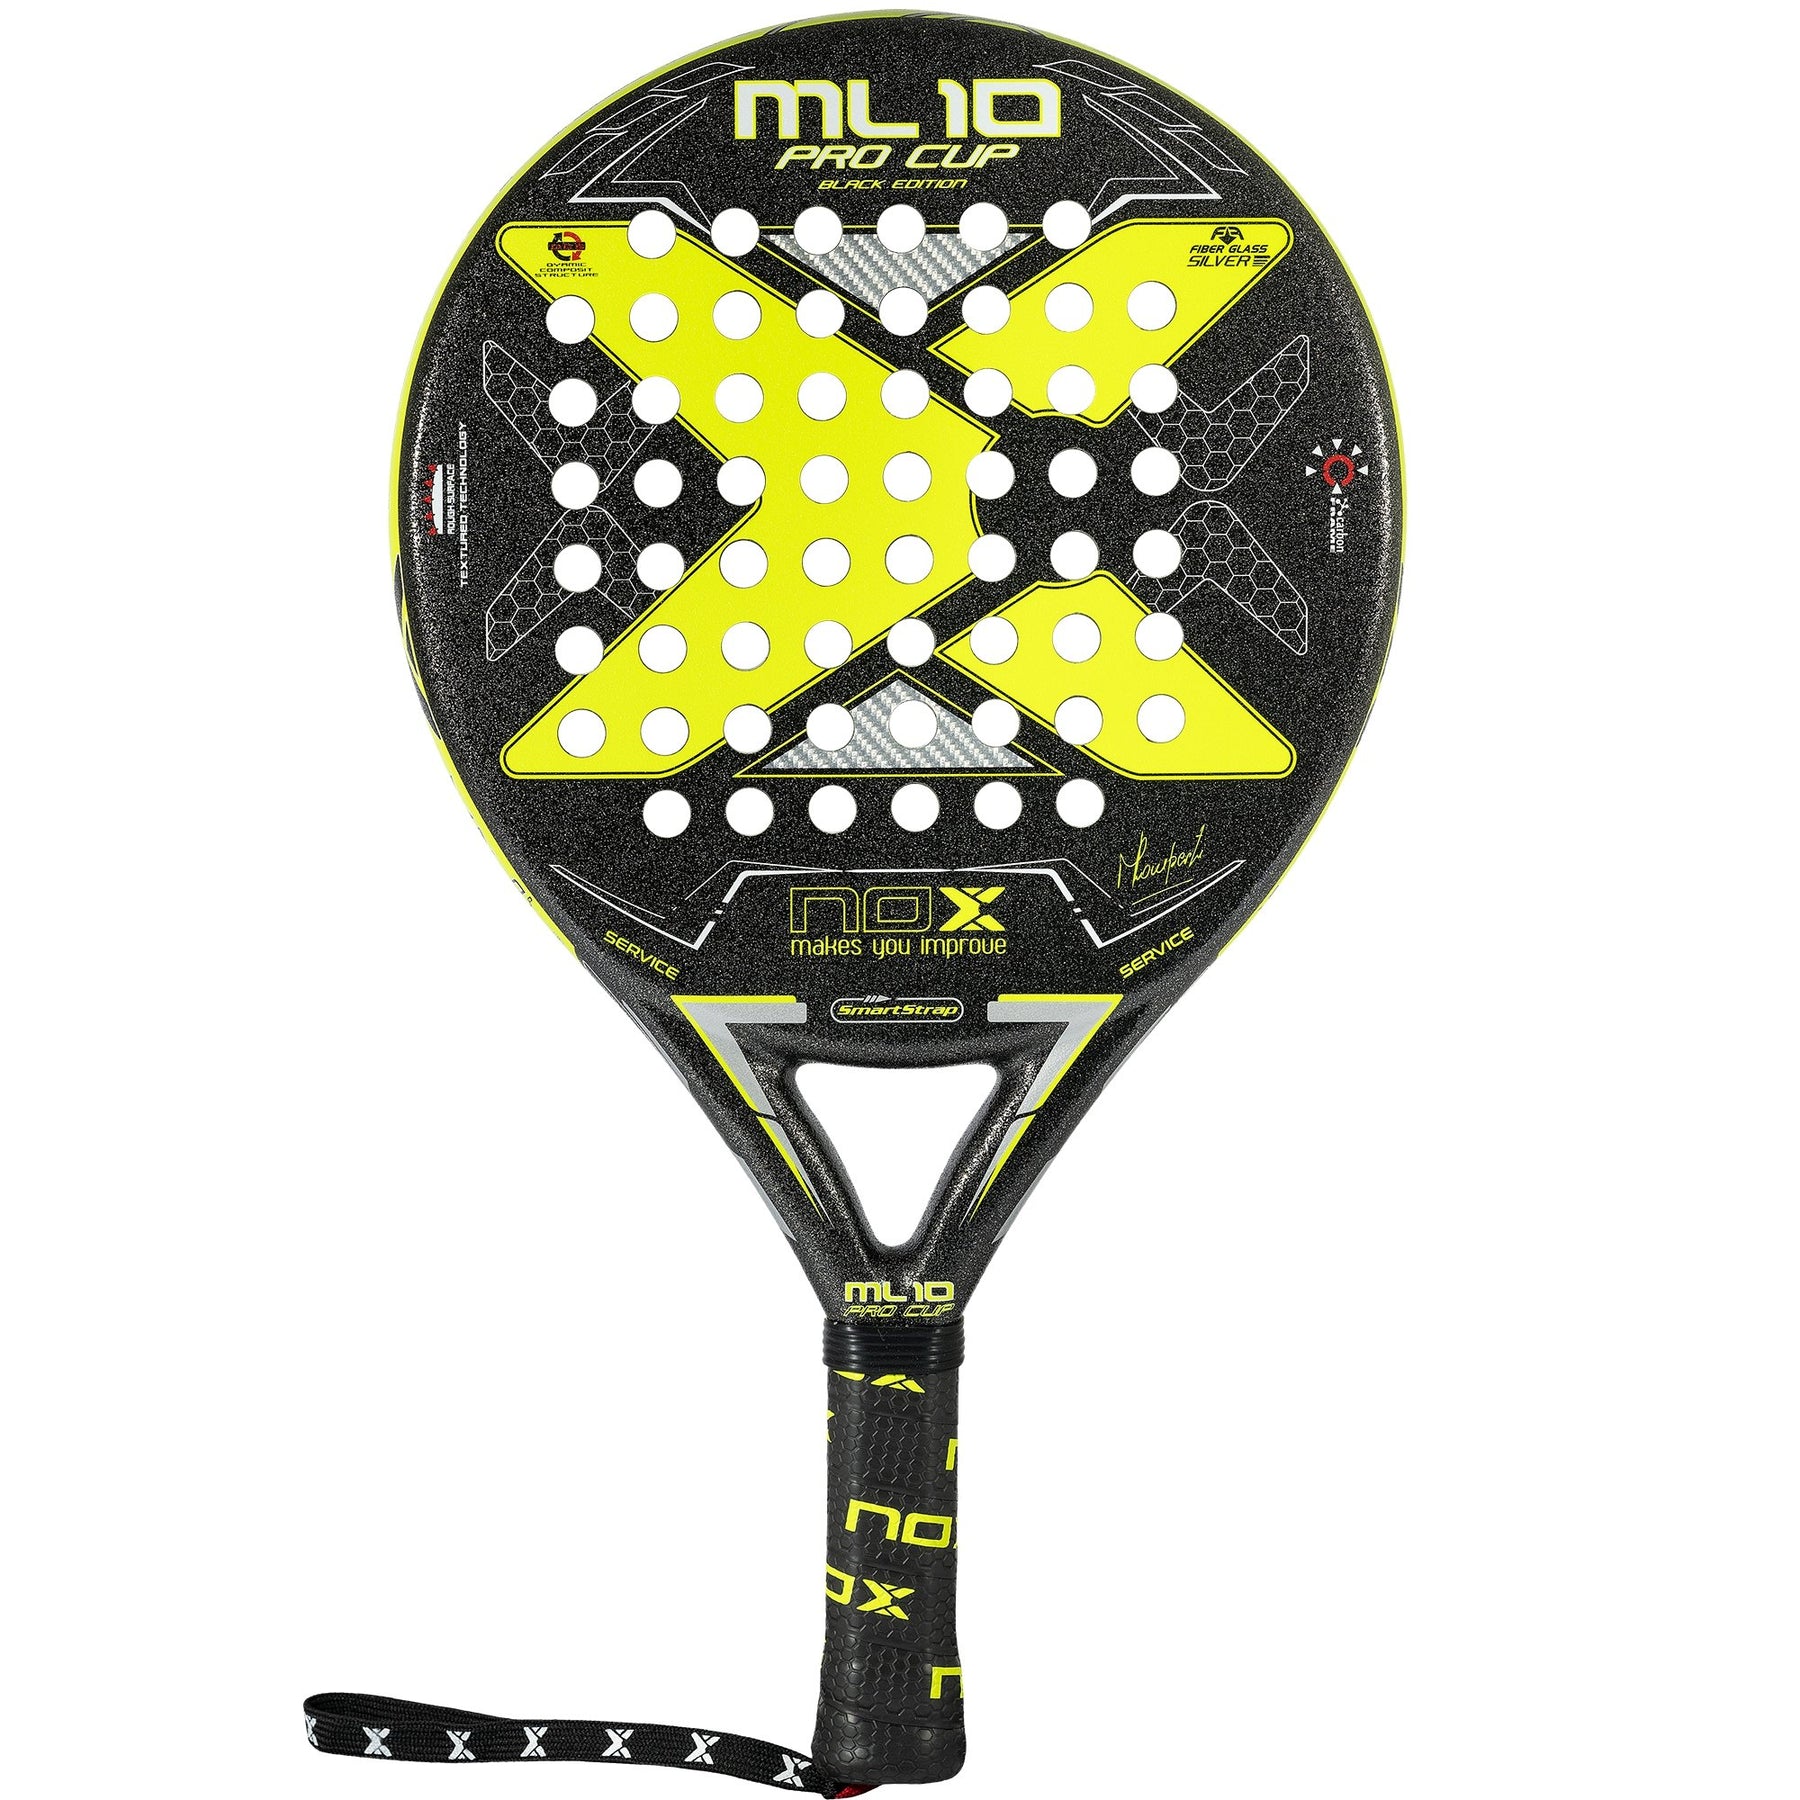 PALA NOX ML10 PRO CUP ROUGH SURFACE EDITION 2022 - Tenis